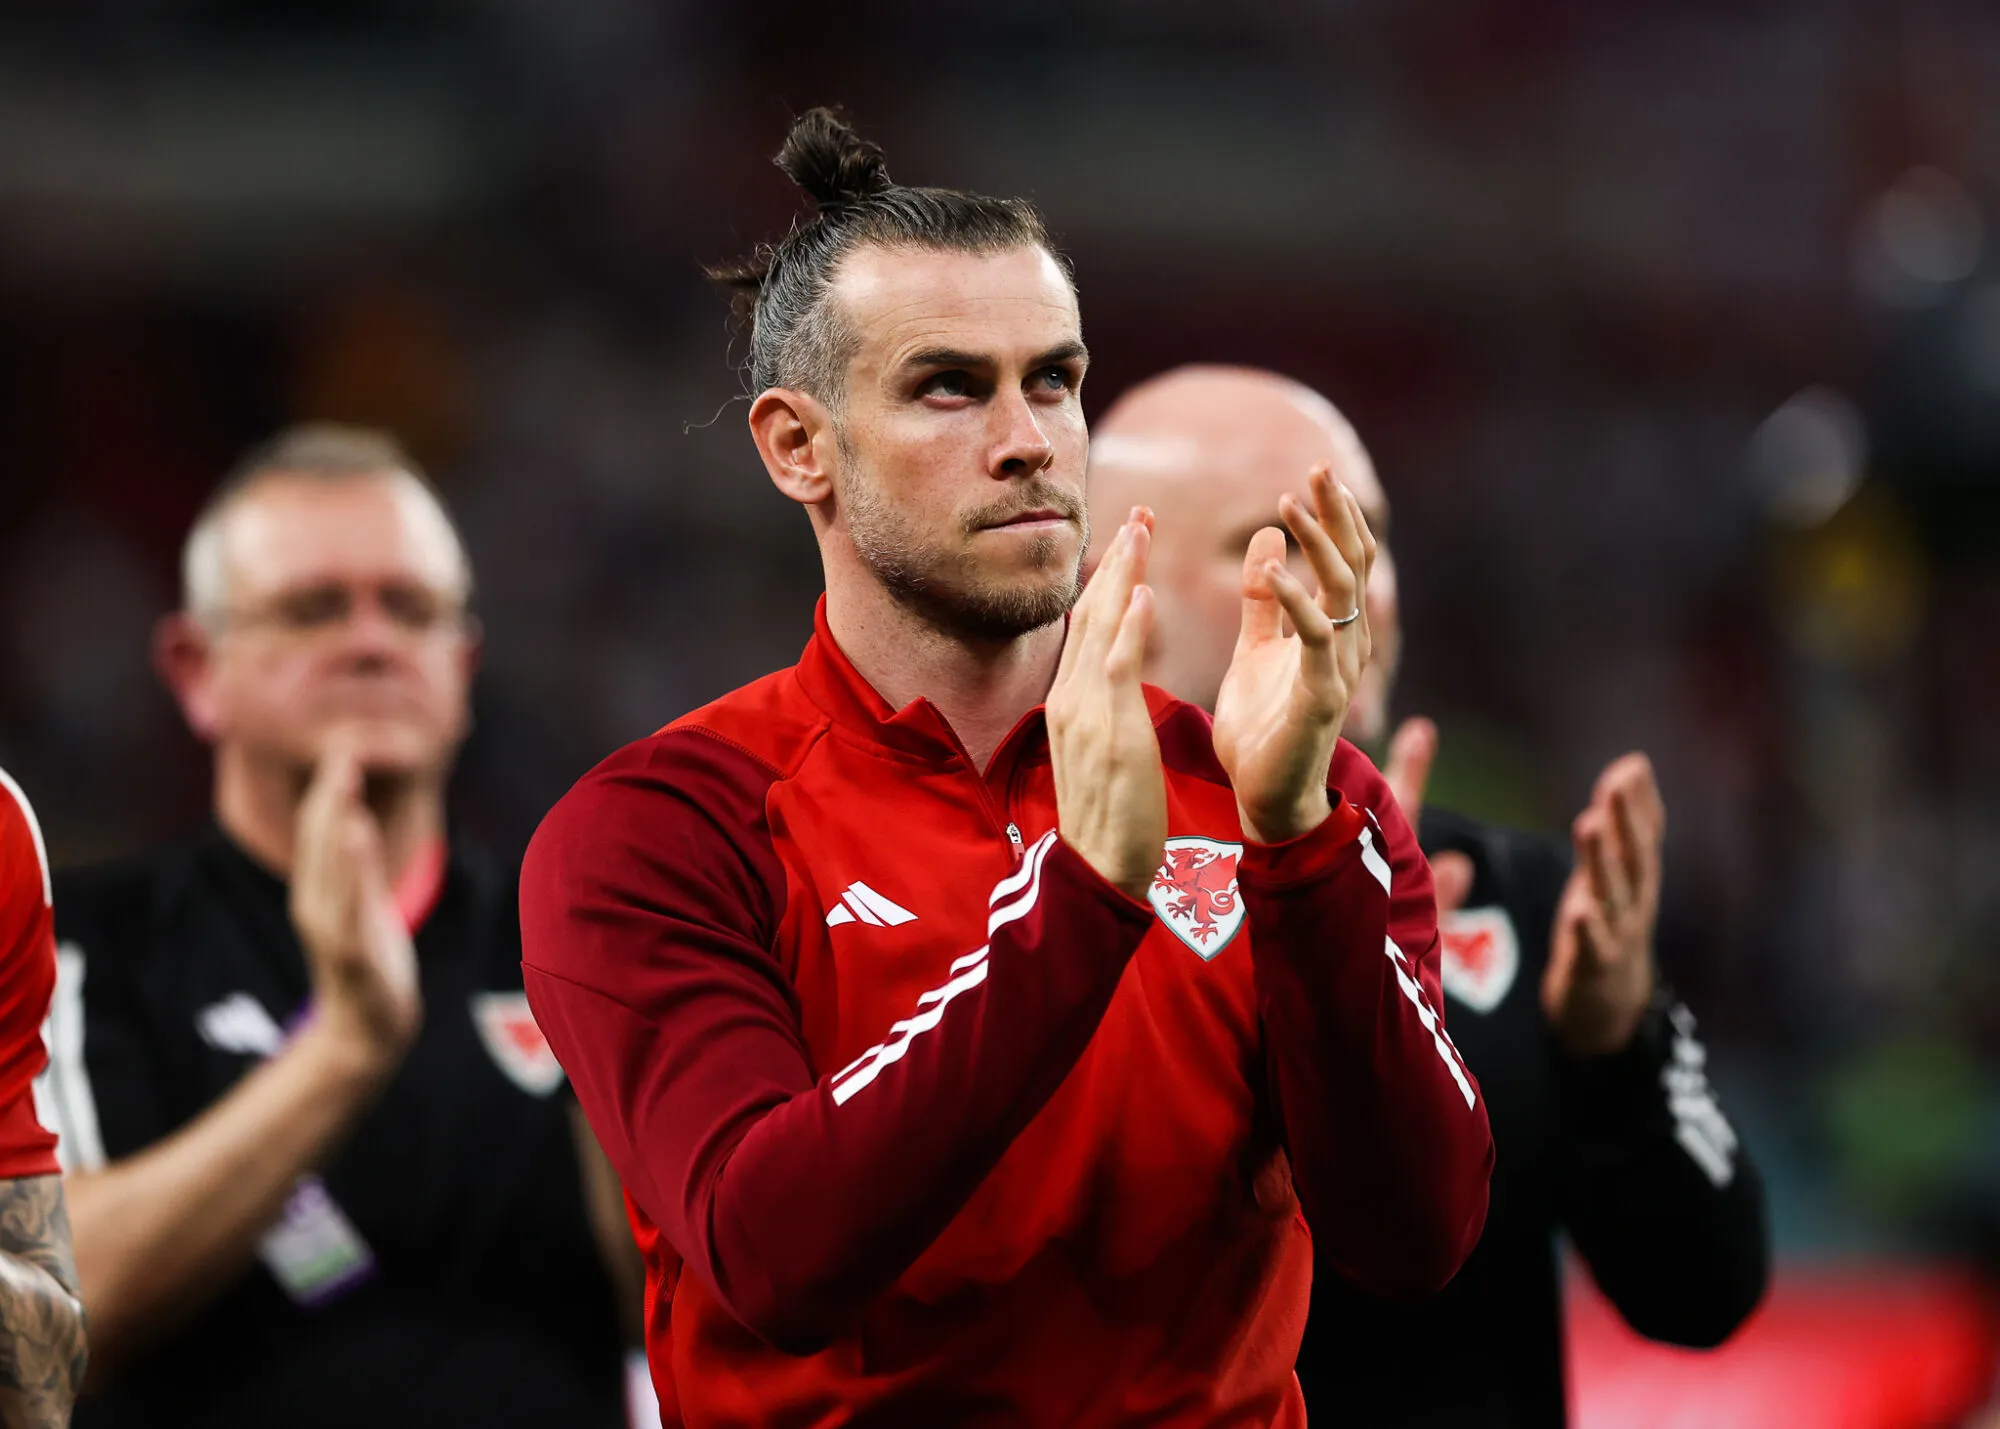 29th November 2022; Ahmed bin Ali Stadium, Al Rayyan, Qatar; FIFA World Cup Football, Wales versus England; A disappointed Gareth Bale of Wales appluading the Wales fans at full time after England knock out Wales in the Group stages - Photo by Icon sport